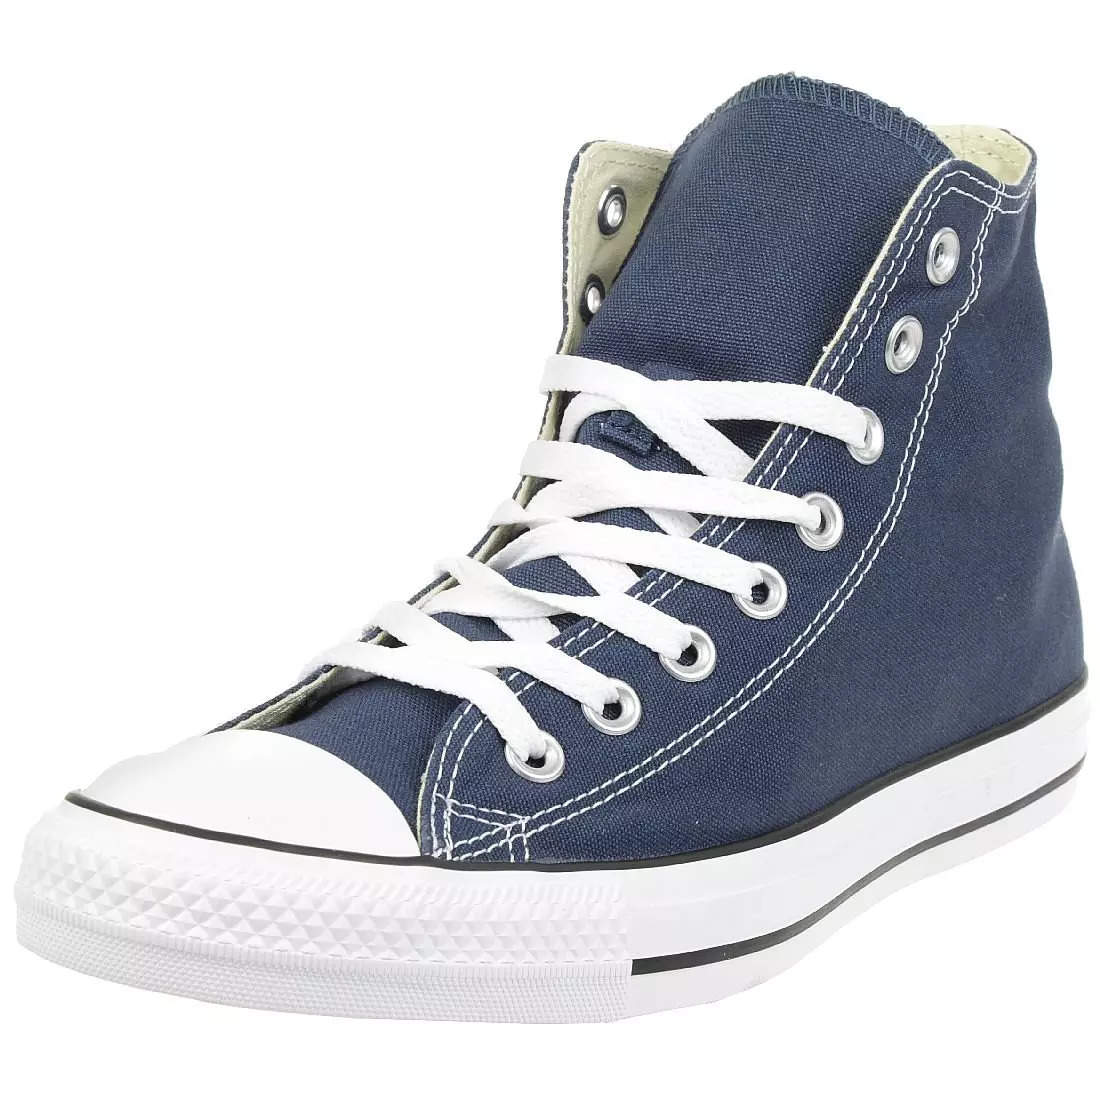 Converse Sneakers For Men: 10 Best Converse Sneakers For Men in India ...